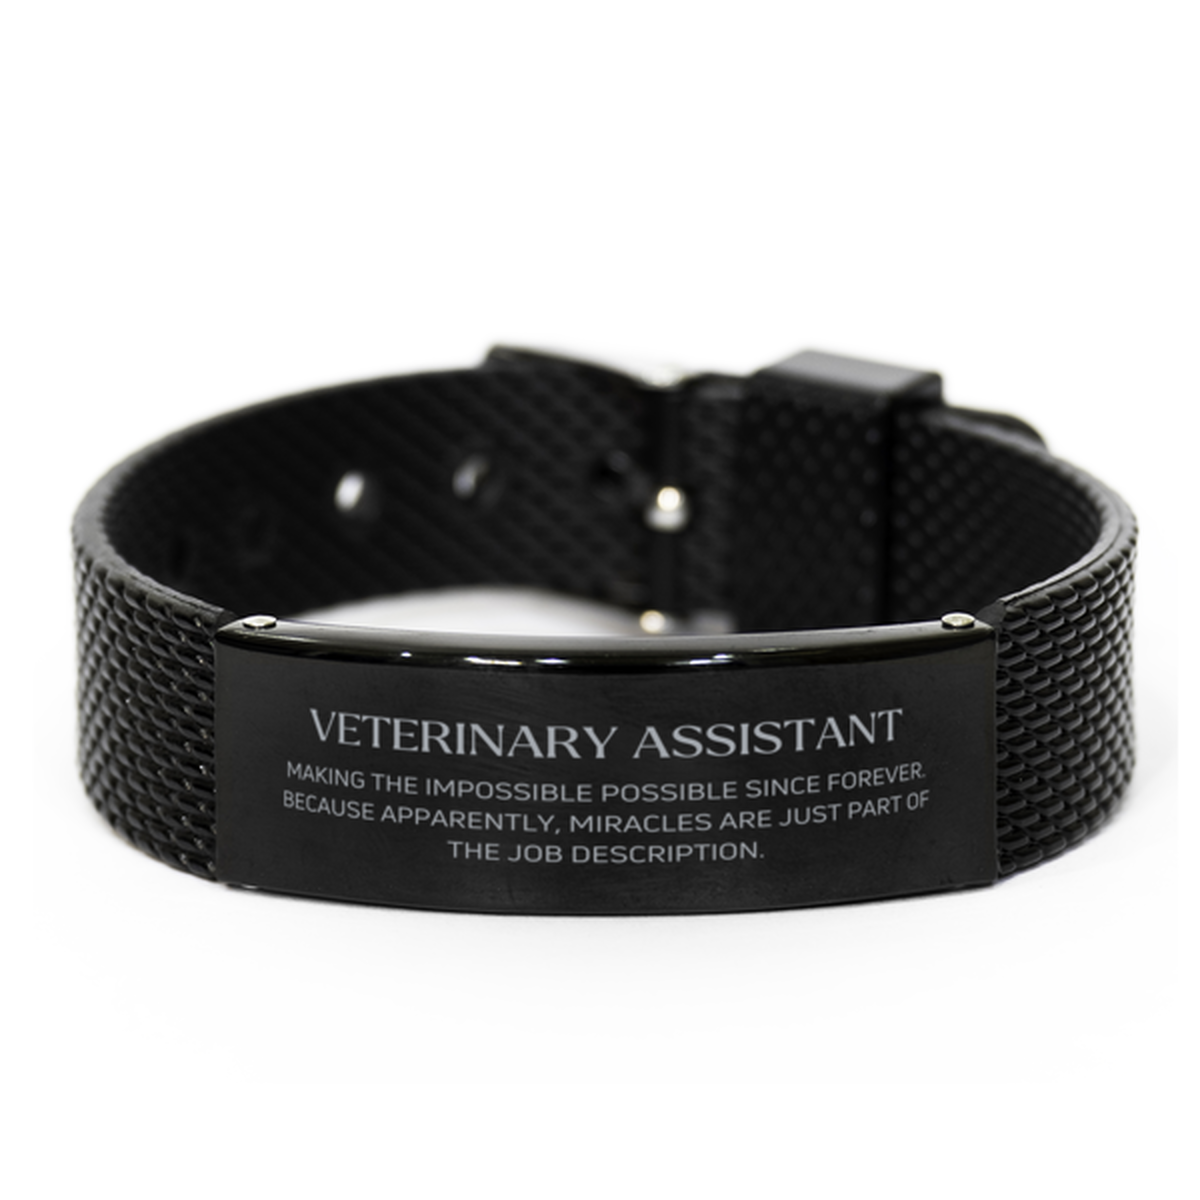 Funny Veterinary Assistant Gifts, Miracles are just part of the job description, Inspirational Birthday Black Shark Mesh Bracelet For Veterinary Assistant, Men, Women, Coworkers, Friends, Boss